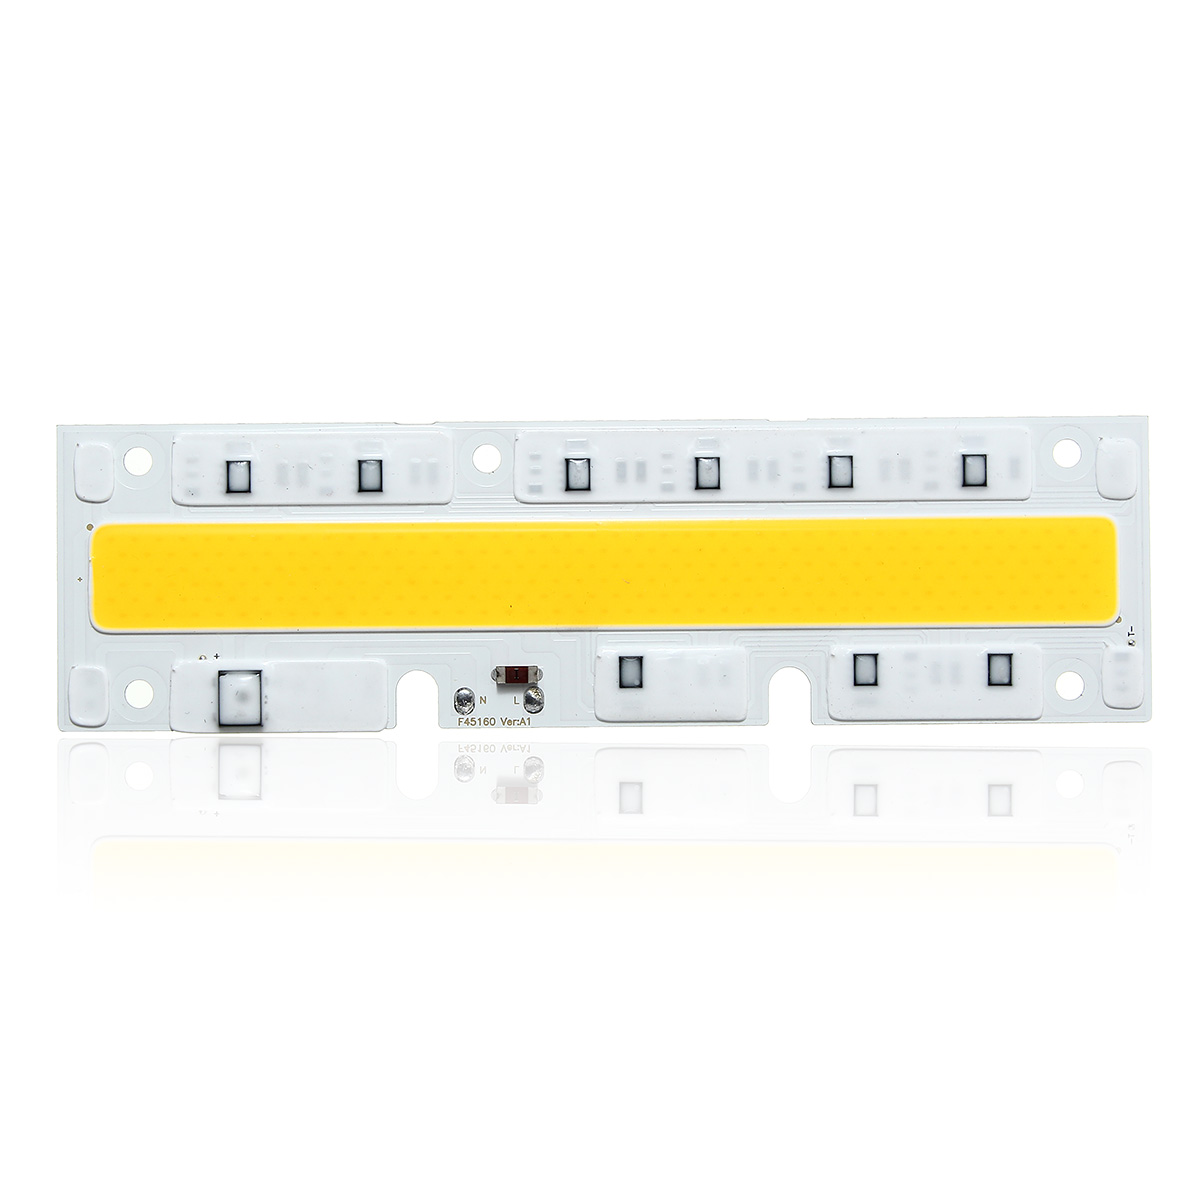 Find 1X 5X 10X 100W 7400LM Warm/White 45 X 160MM DIY COB LED Chip Bulb Bead For Flood Light AC110/220V for Sale on Gipsybee.com with cryptocurrencies